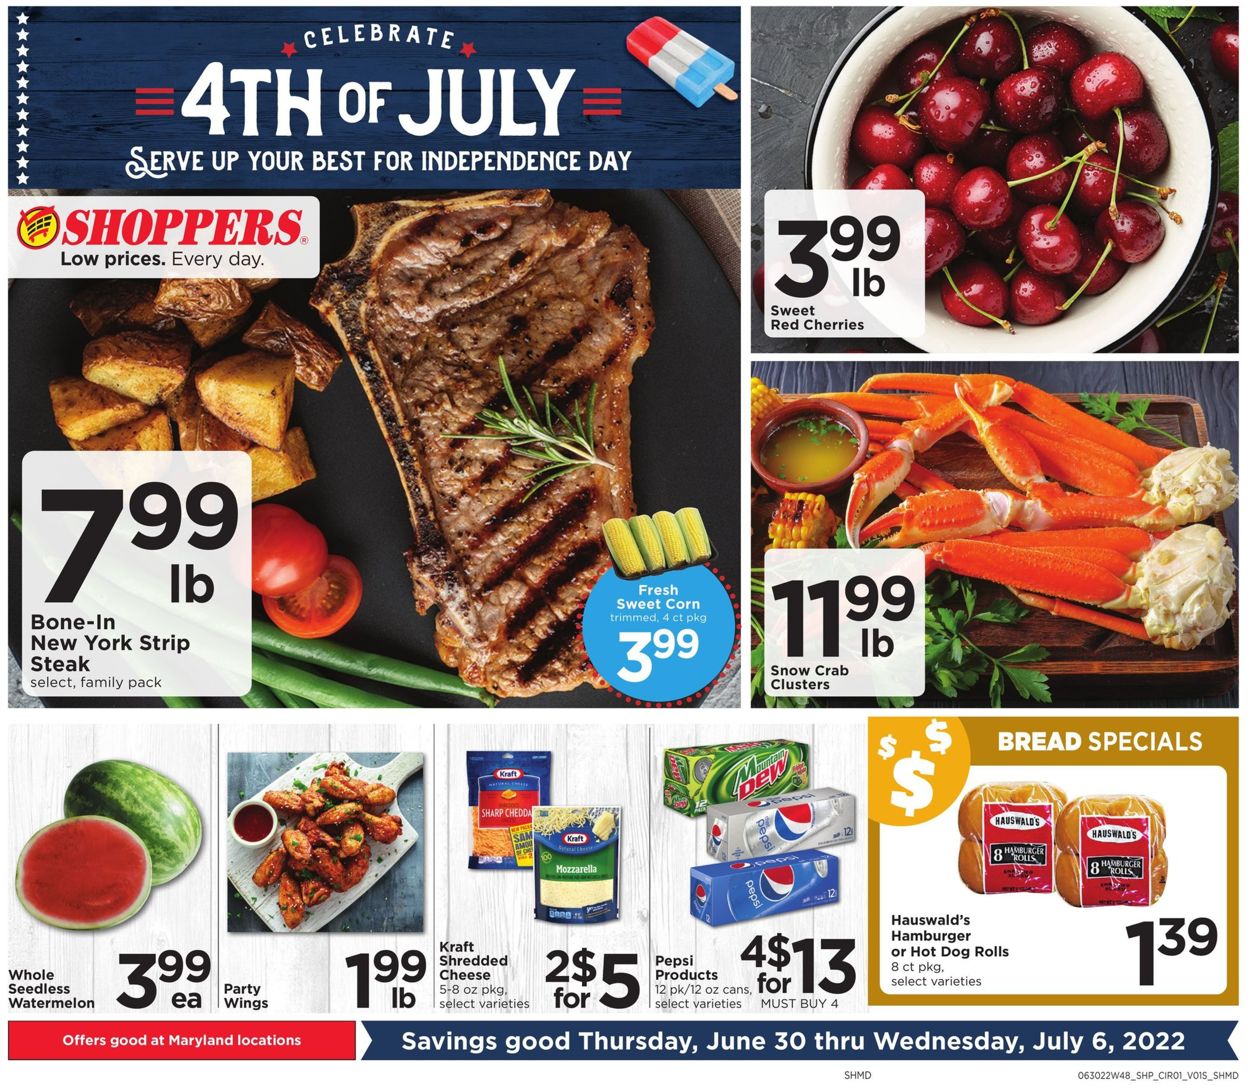 Shoppers Food & Pharmacy - 4th of July Sale Weekly Ad Circular - valid 06/30-07/06/2022